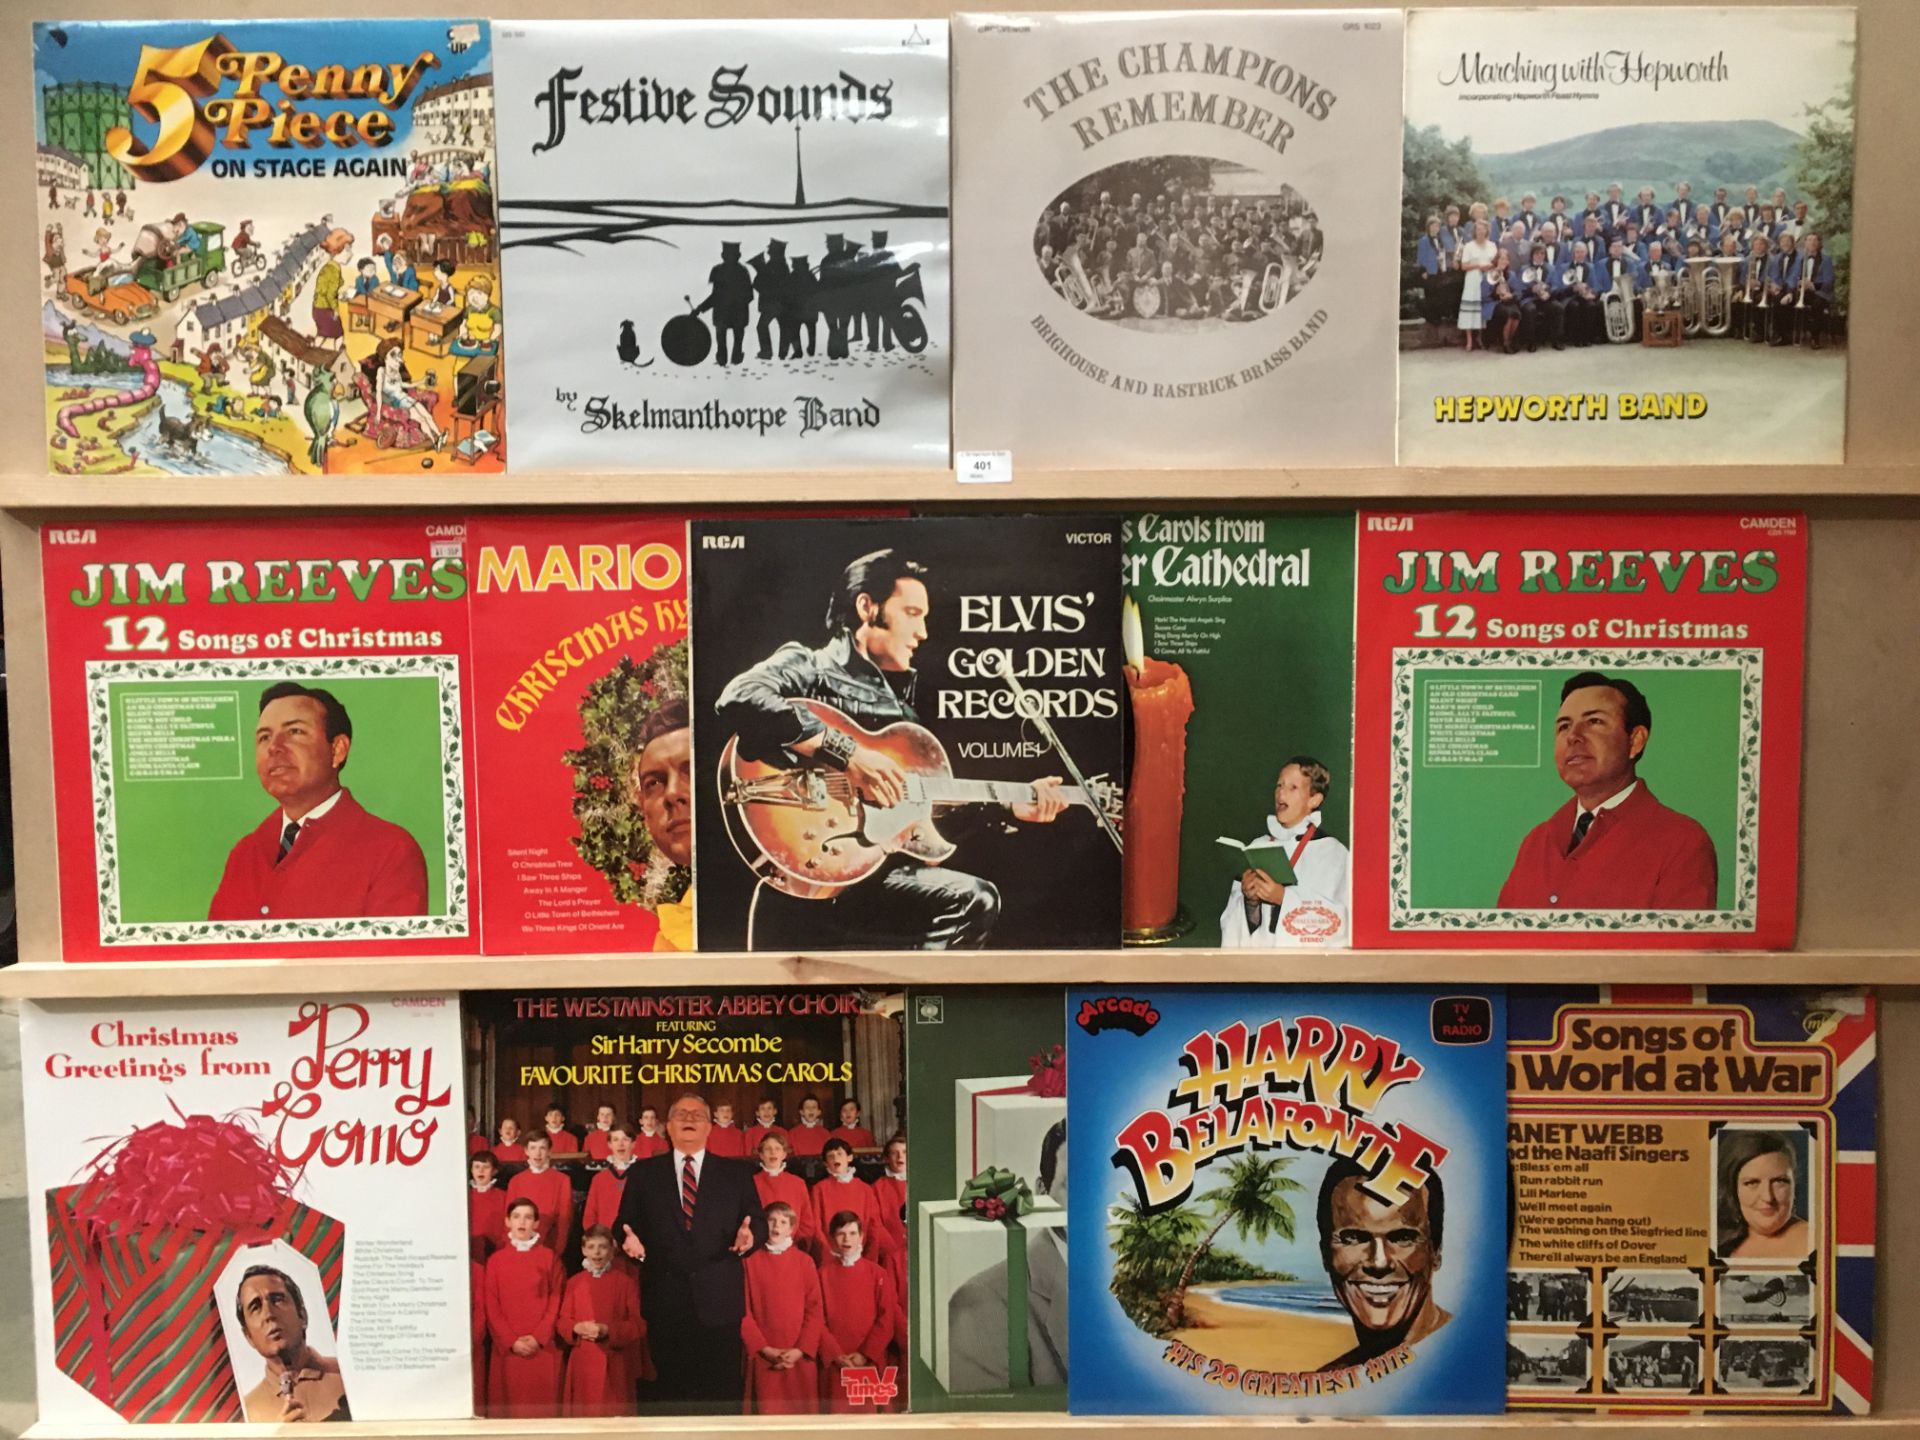 25 x assorted LPs - 5 Penny Piece, various Christmas albums, Dennis Roussos, Bing Crosby etc.